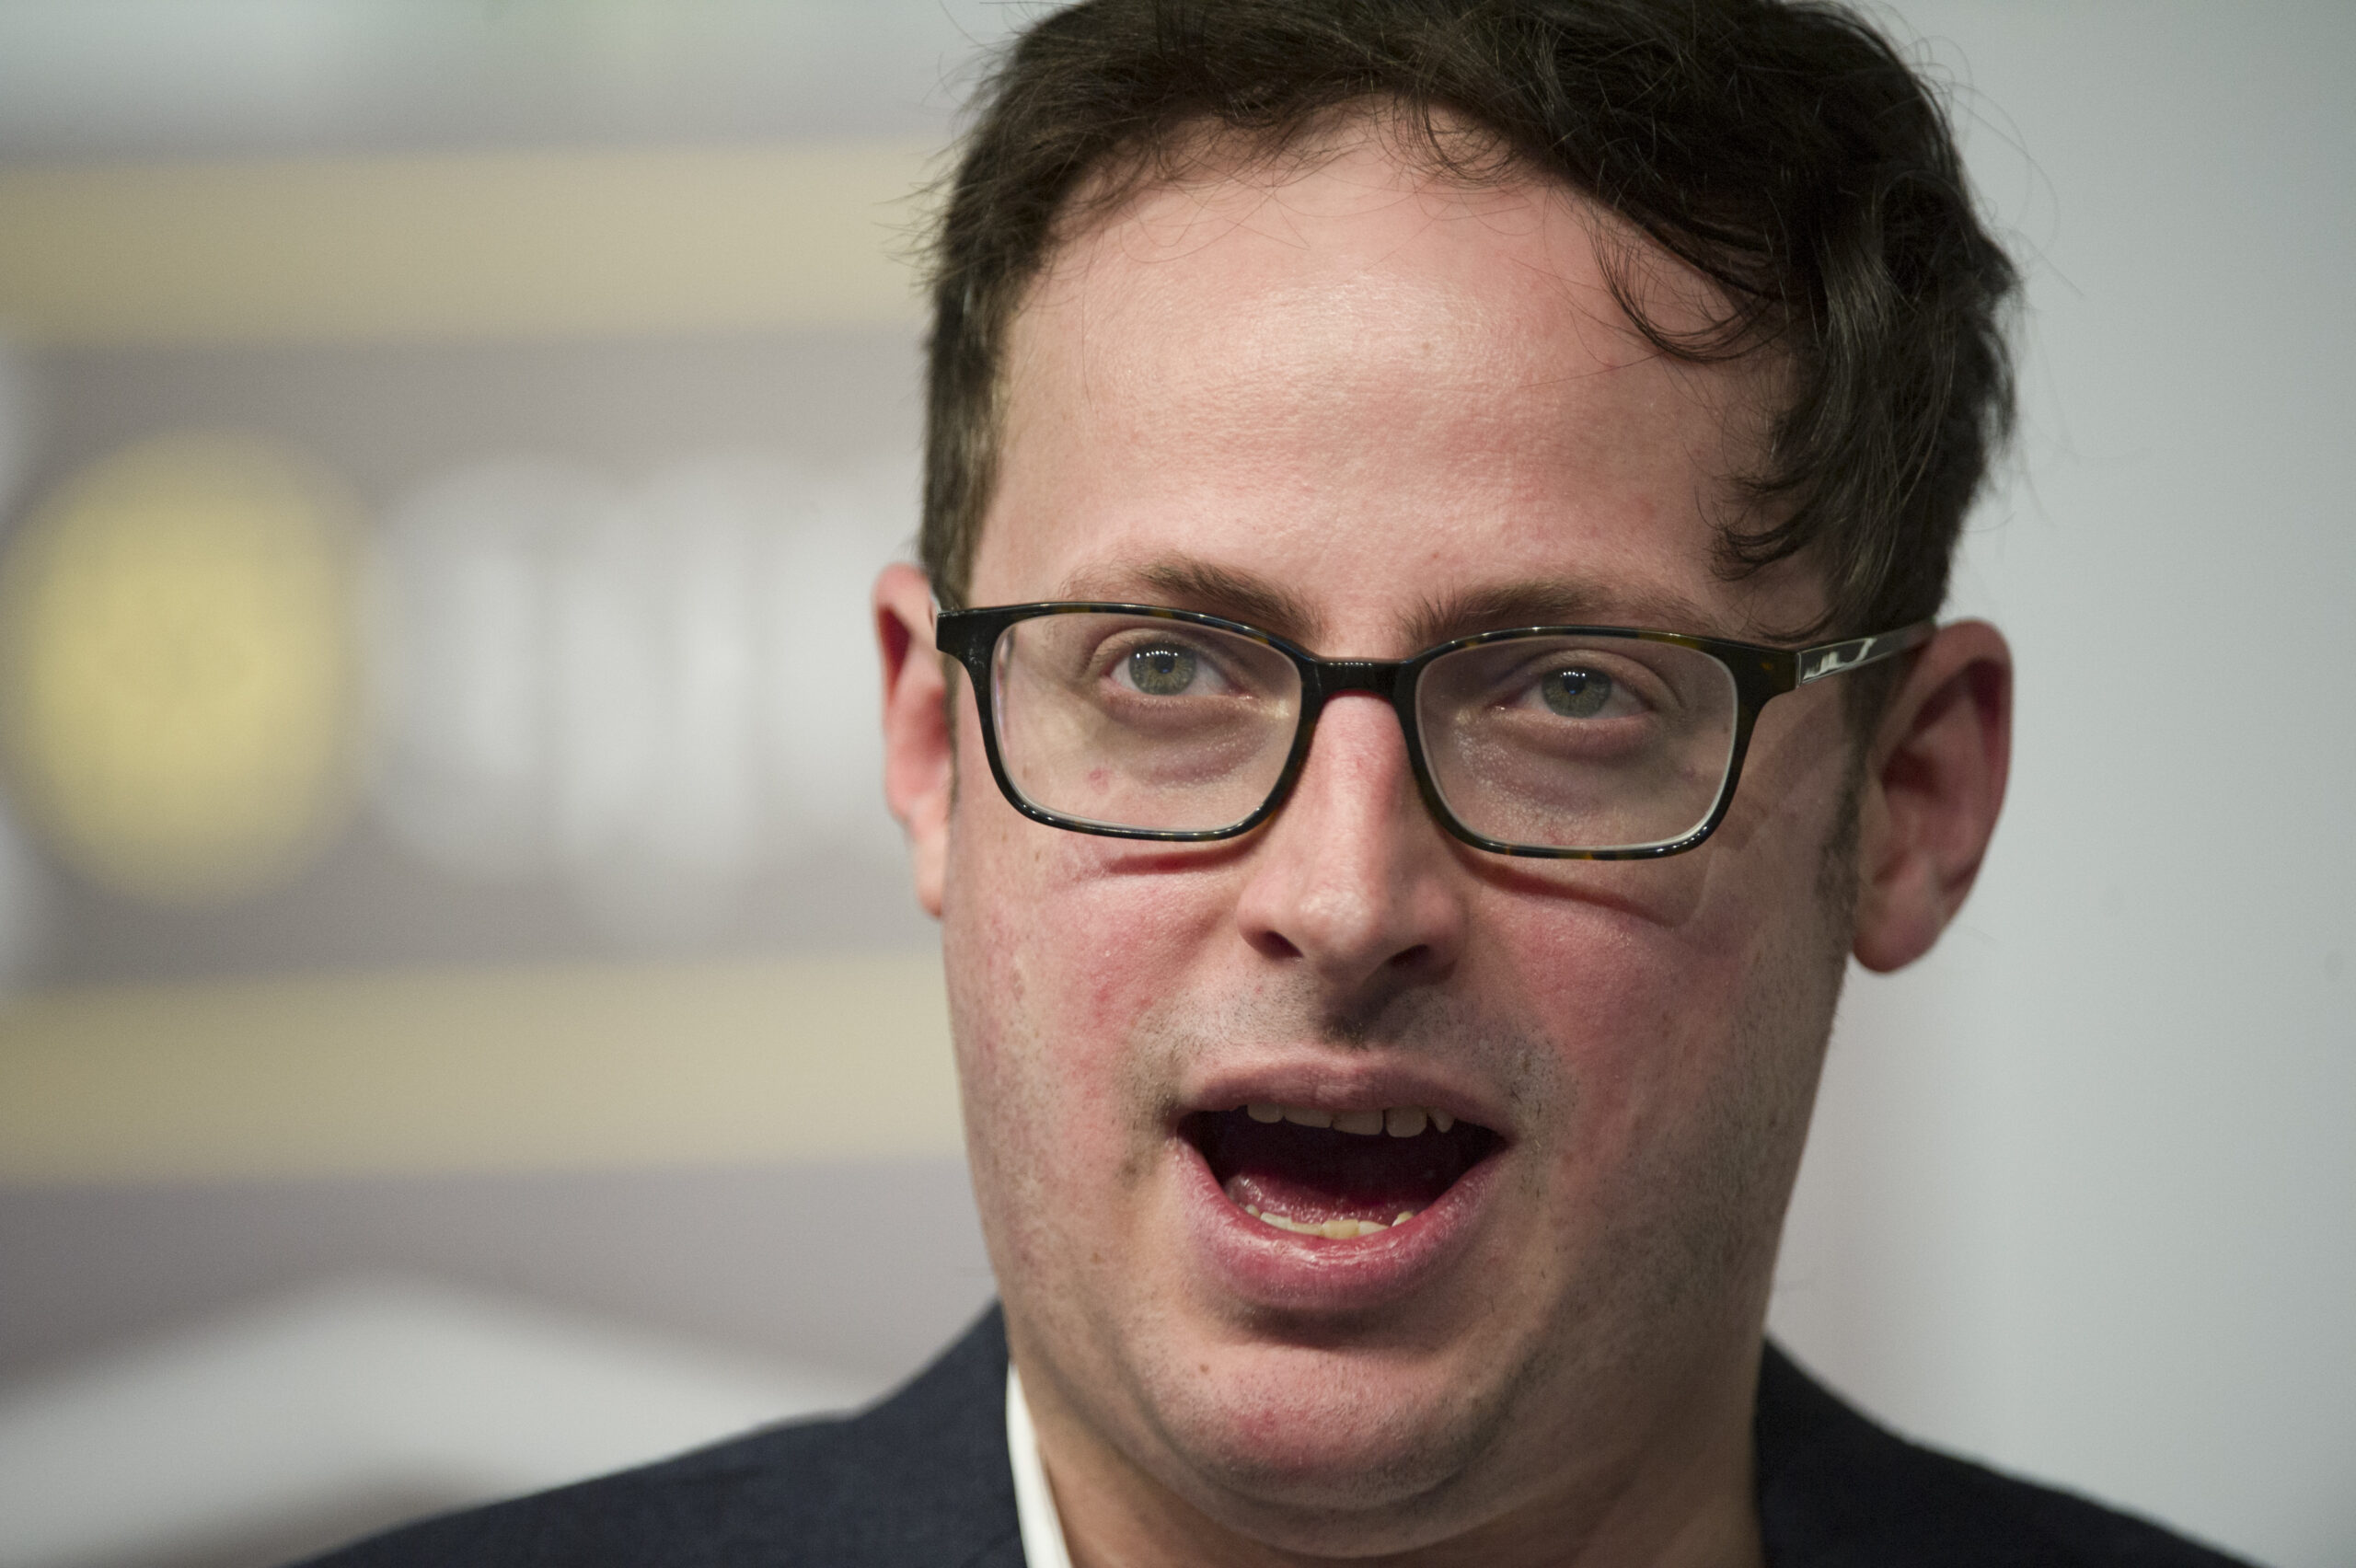 Nate Silver To Leave ABC News In Latest Media Shakeup